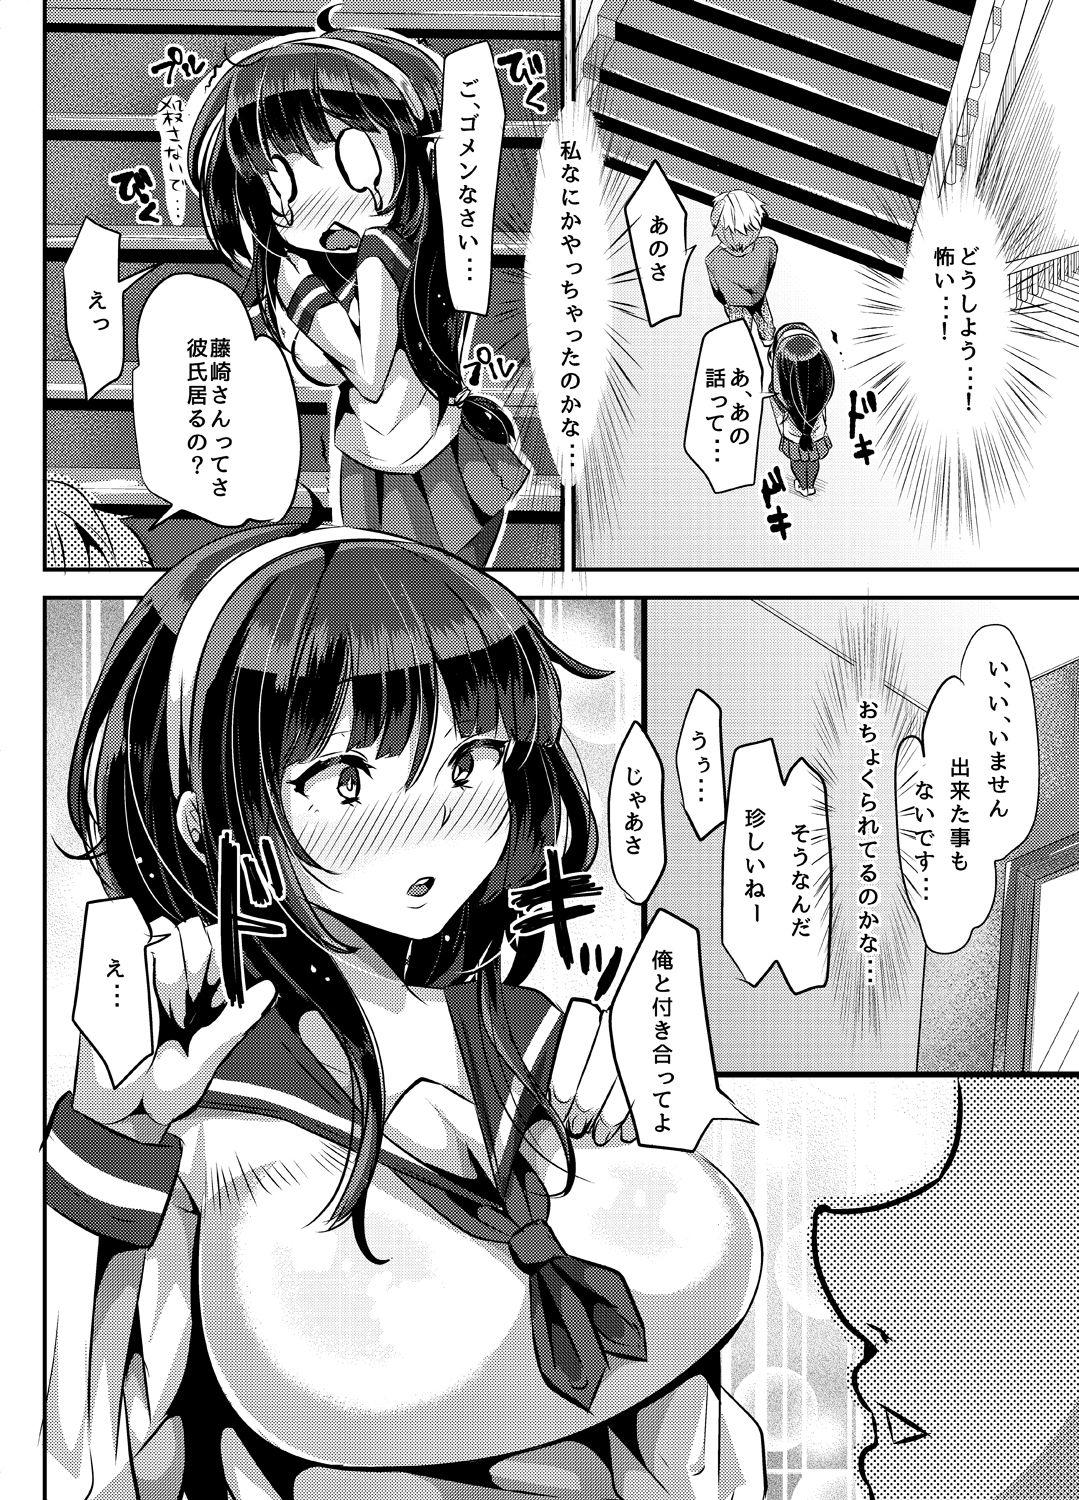 Small Boobs Sukisukisukisukisukisukisukisuki ver.1 Busty - Page 7